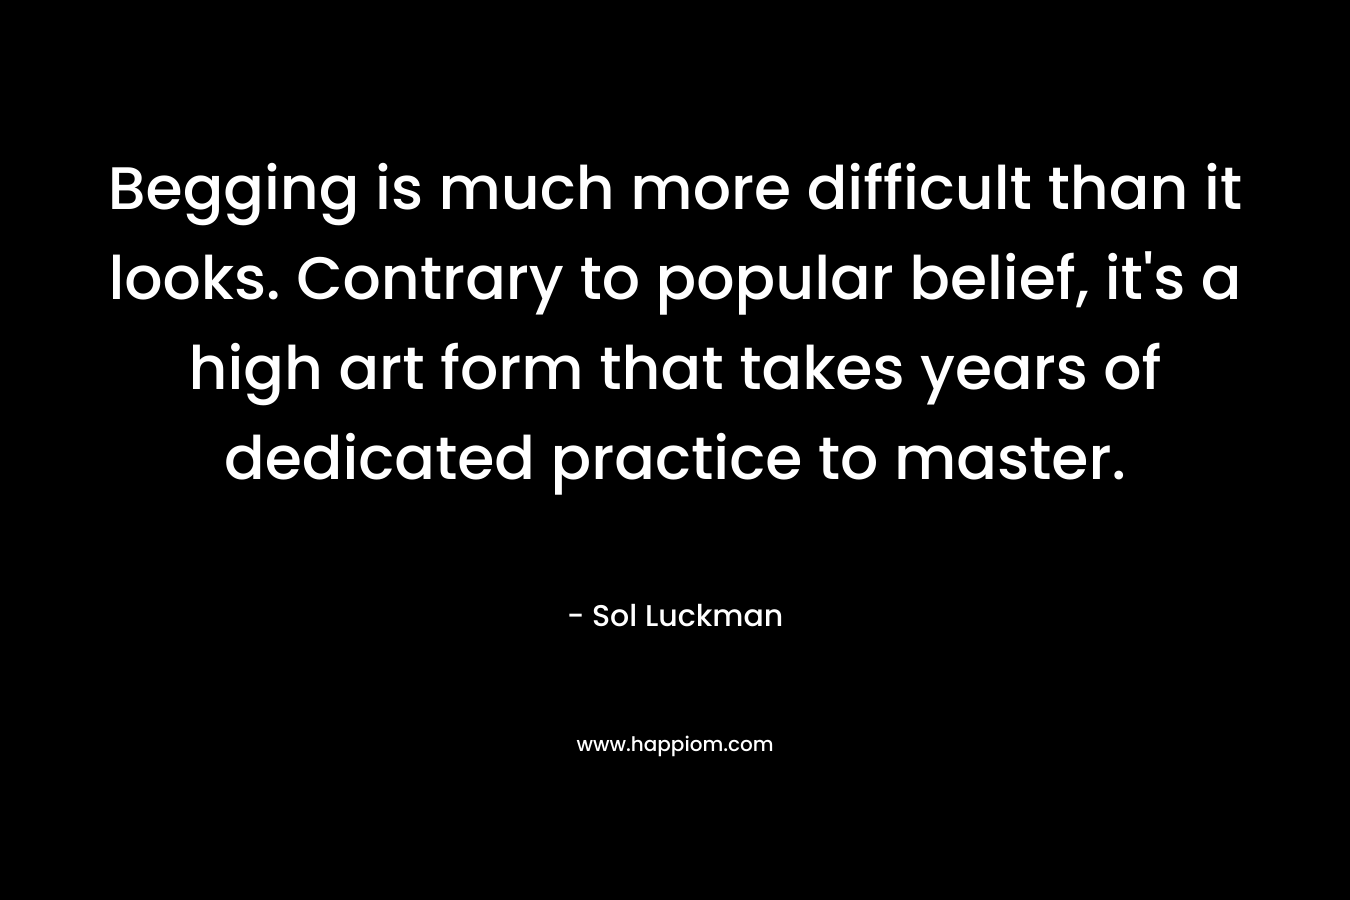 Begging is much more difficult than it looks. Contrary to popular belief, it’s a high art form that takes years of dedicated practice to master. – Sol Luckman